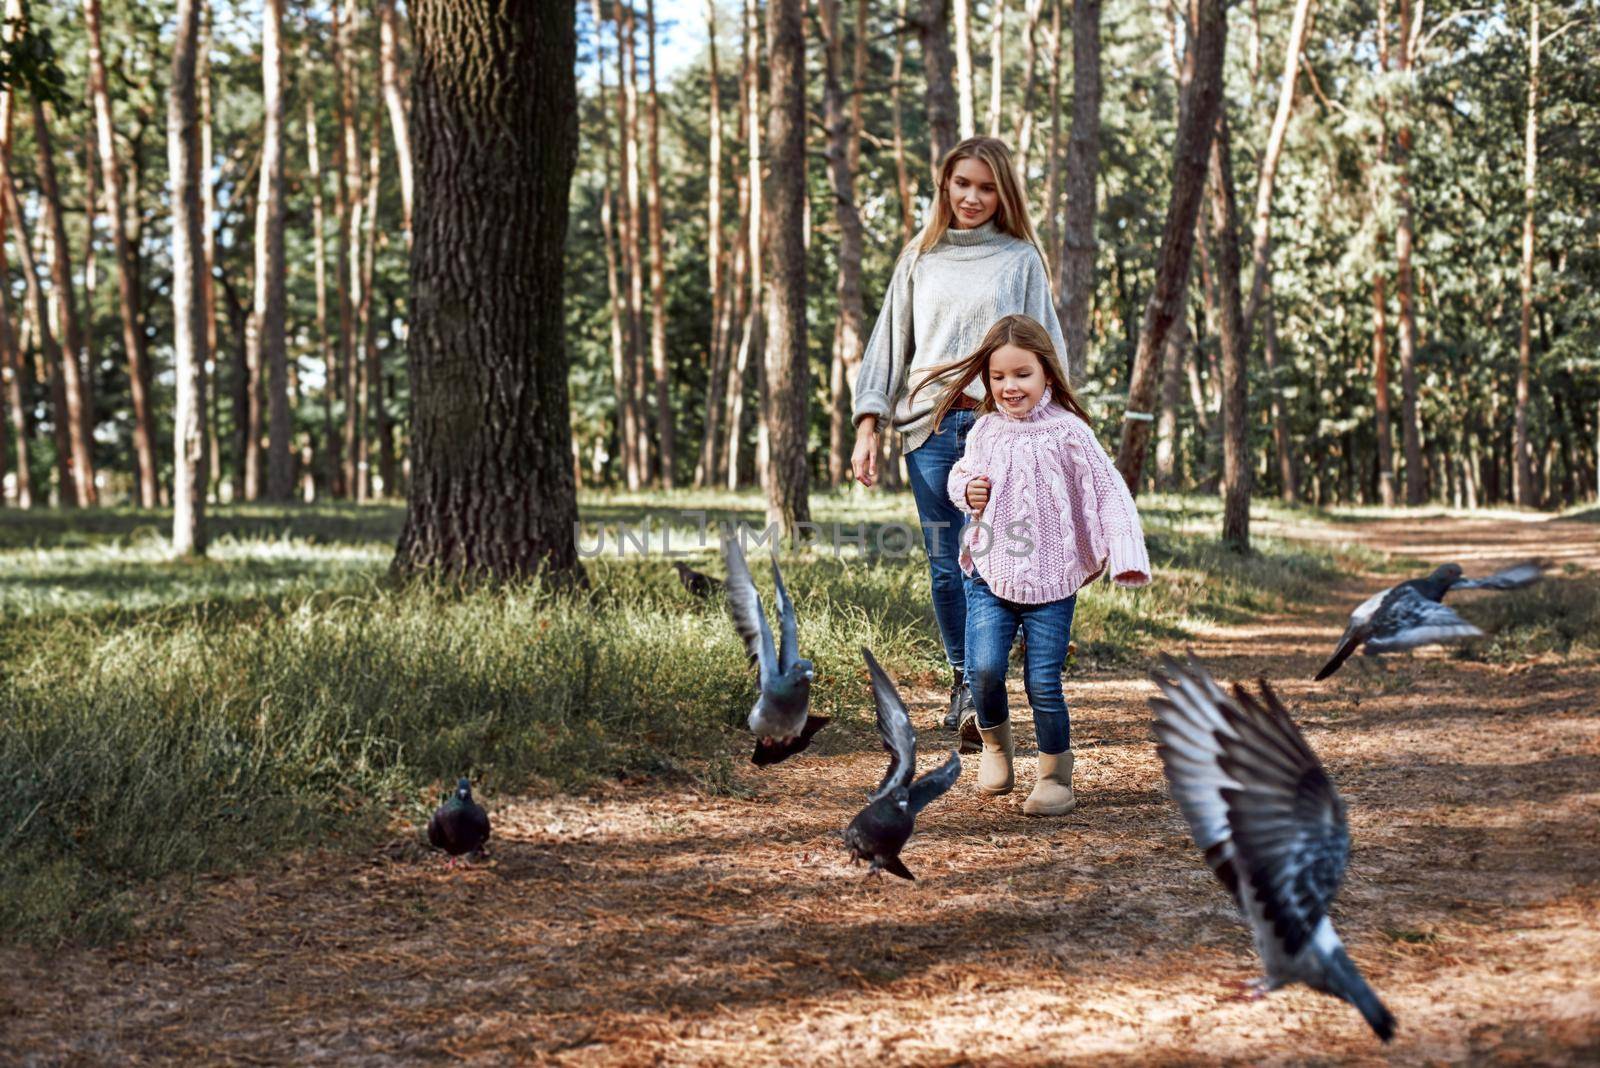 A little curly girl in sweater is catching pigeons with her mother in woods. Cold season, bright sun is seen through the trees. She is wearing pink sweater and young woman is in grey sweater